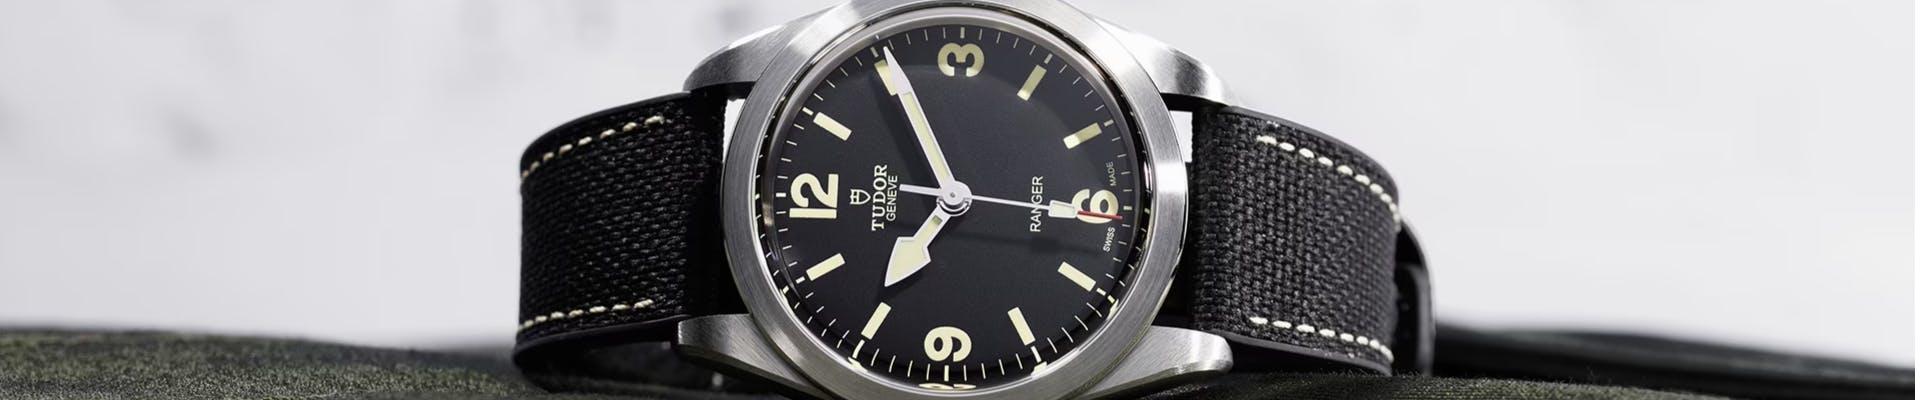 tudor ranger at lee michaels fine jewelry stores